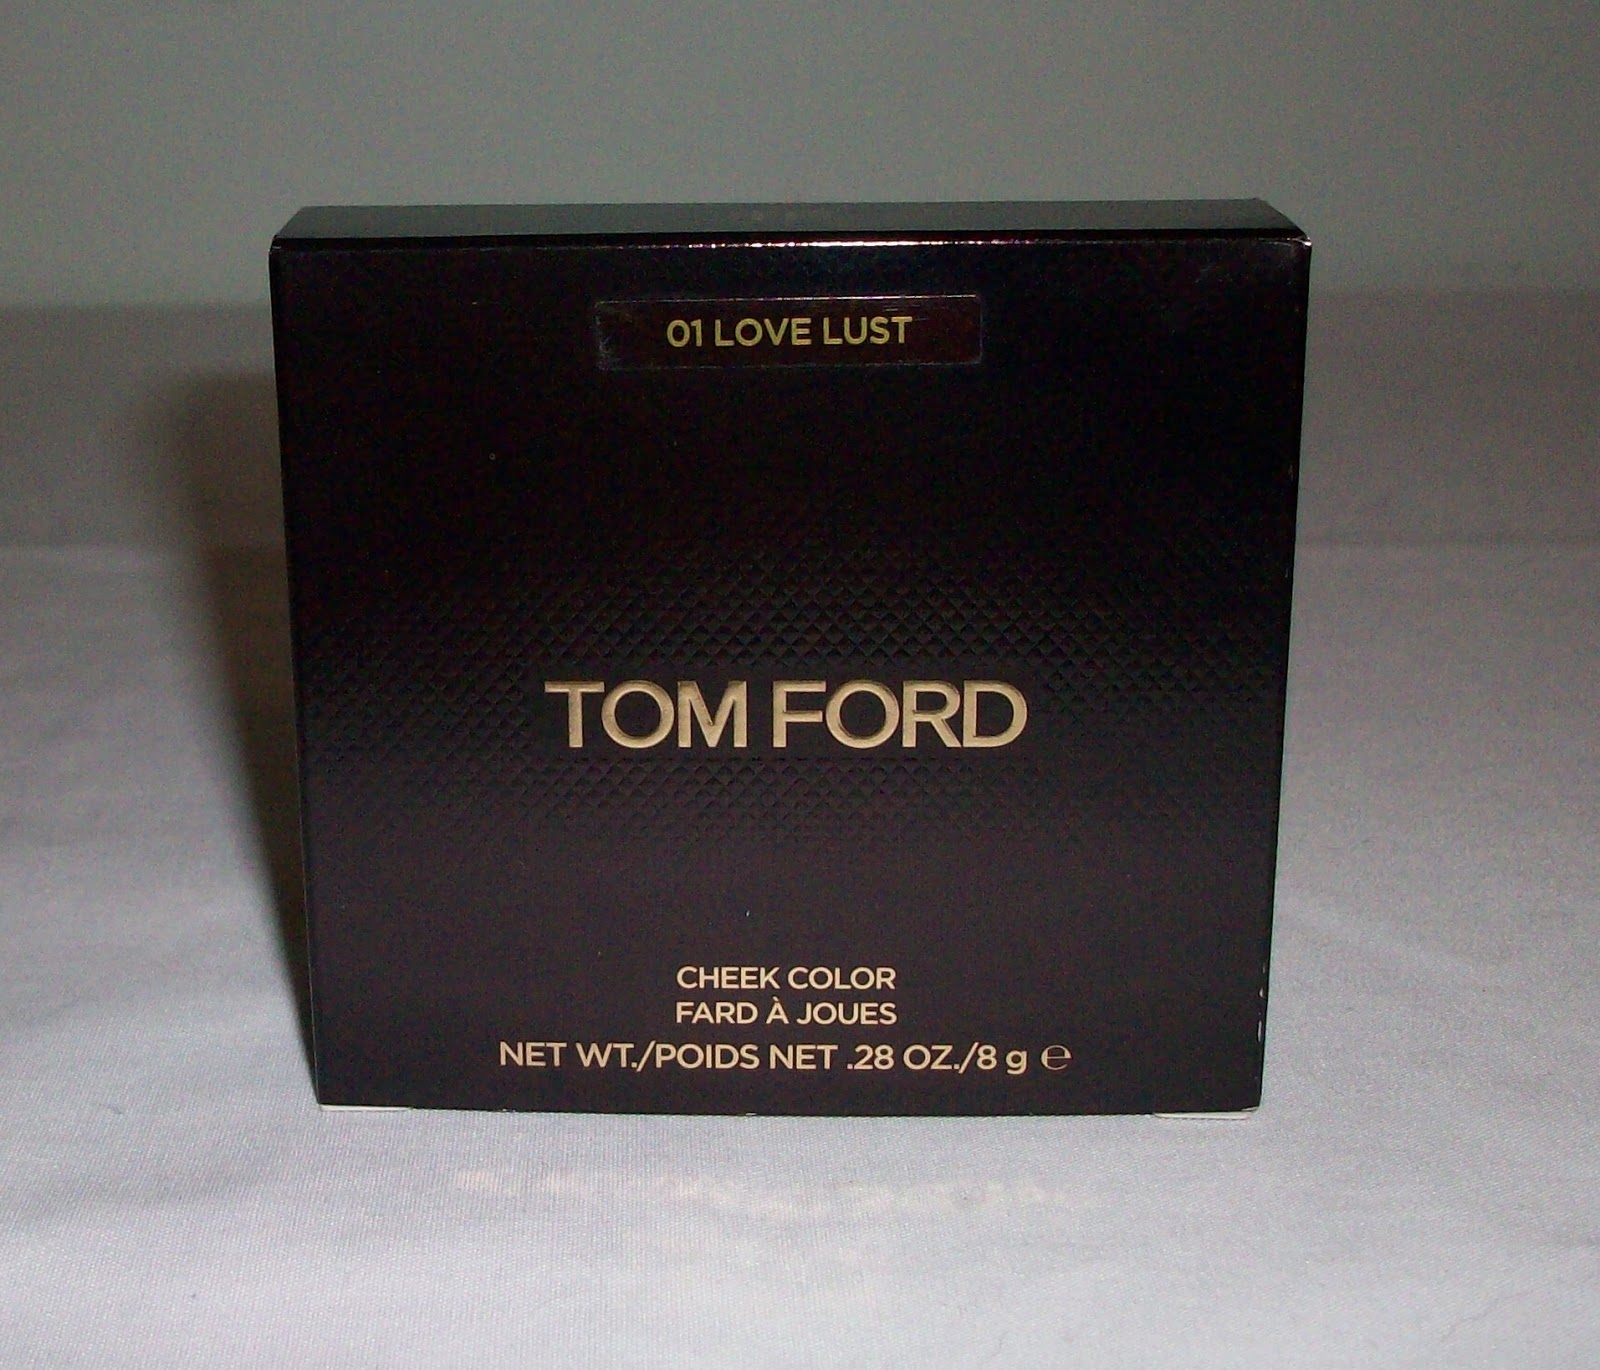 Luxury on the Lips: Tom Ford Cheek Color in 01 Love Lust - Review